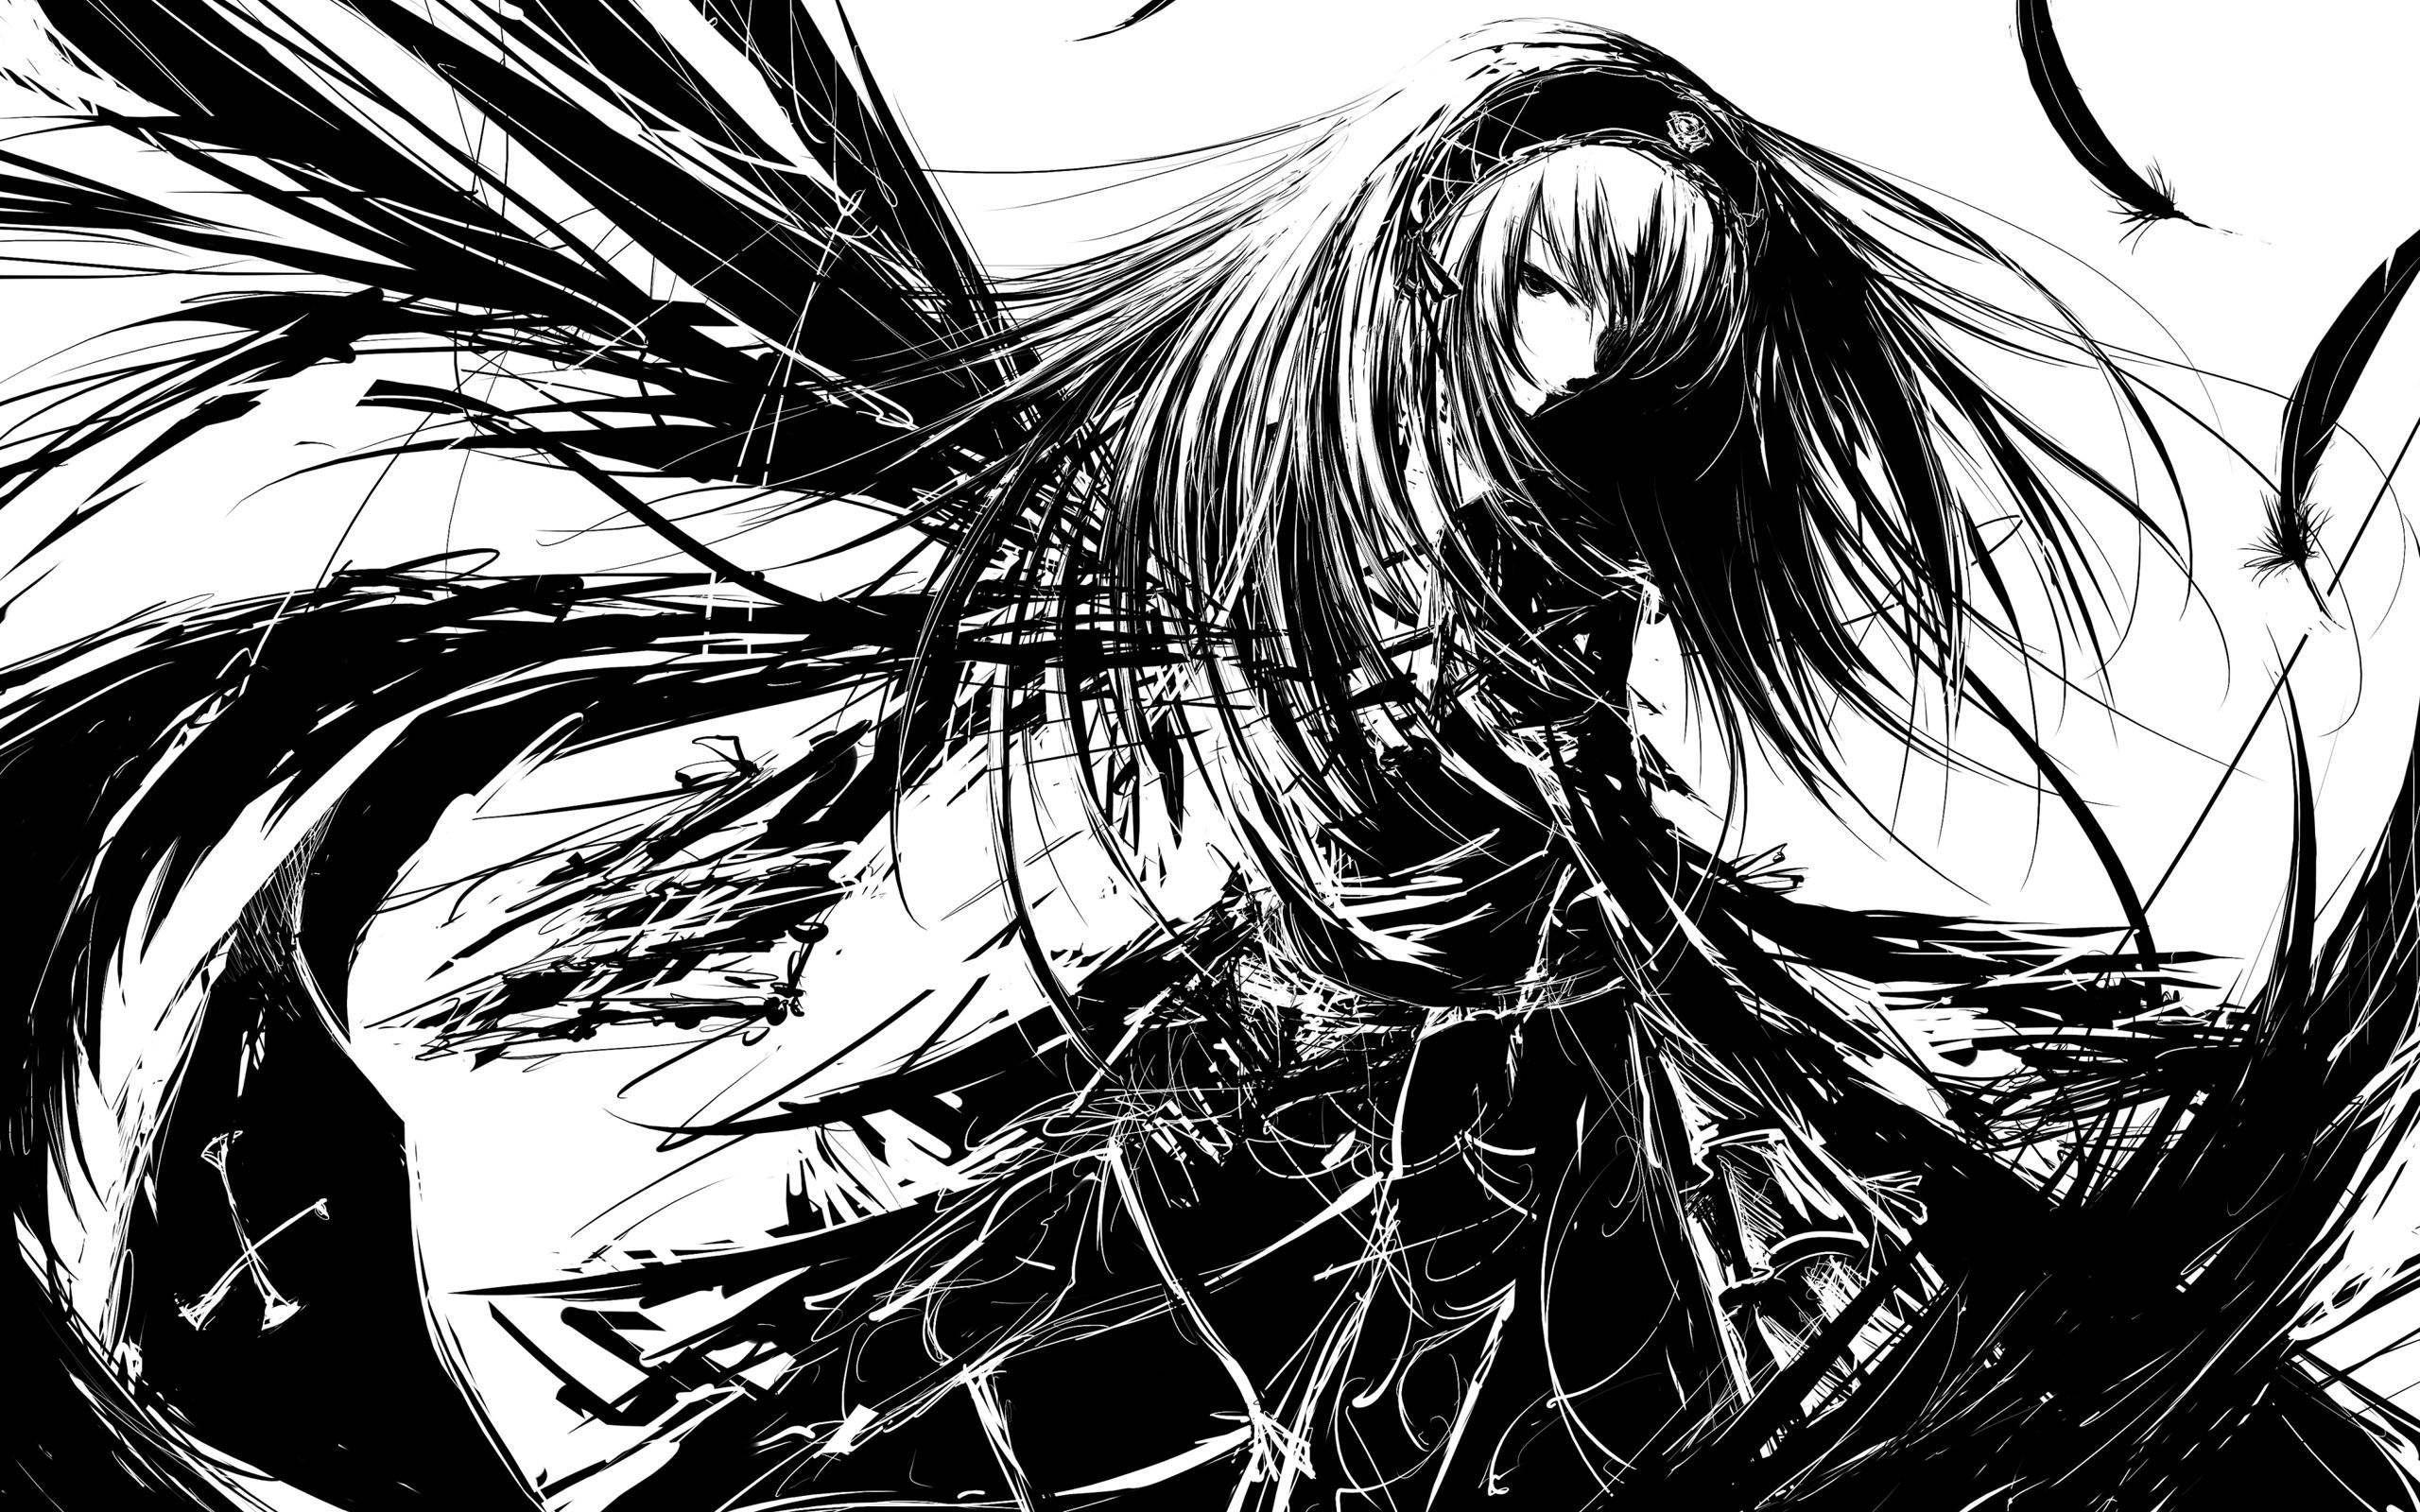 Anime Art Black and White Wallpapers - Top Free Anime Art Black and